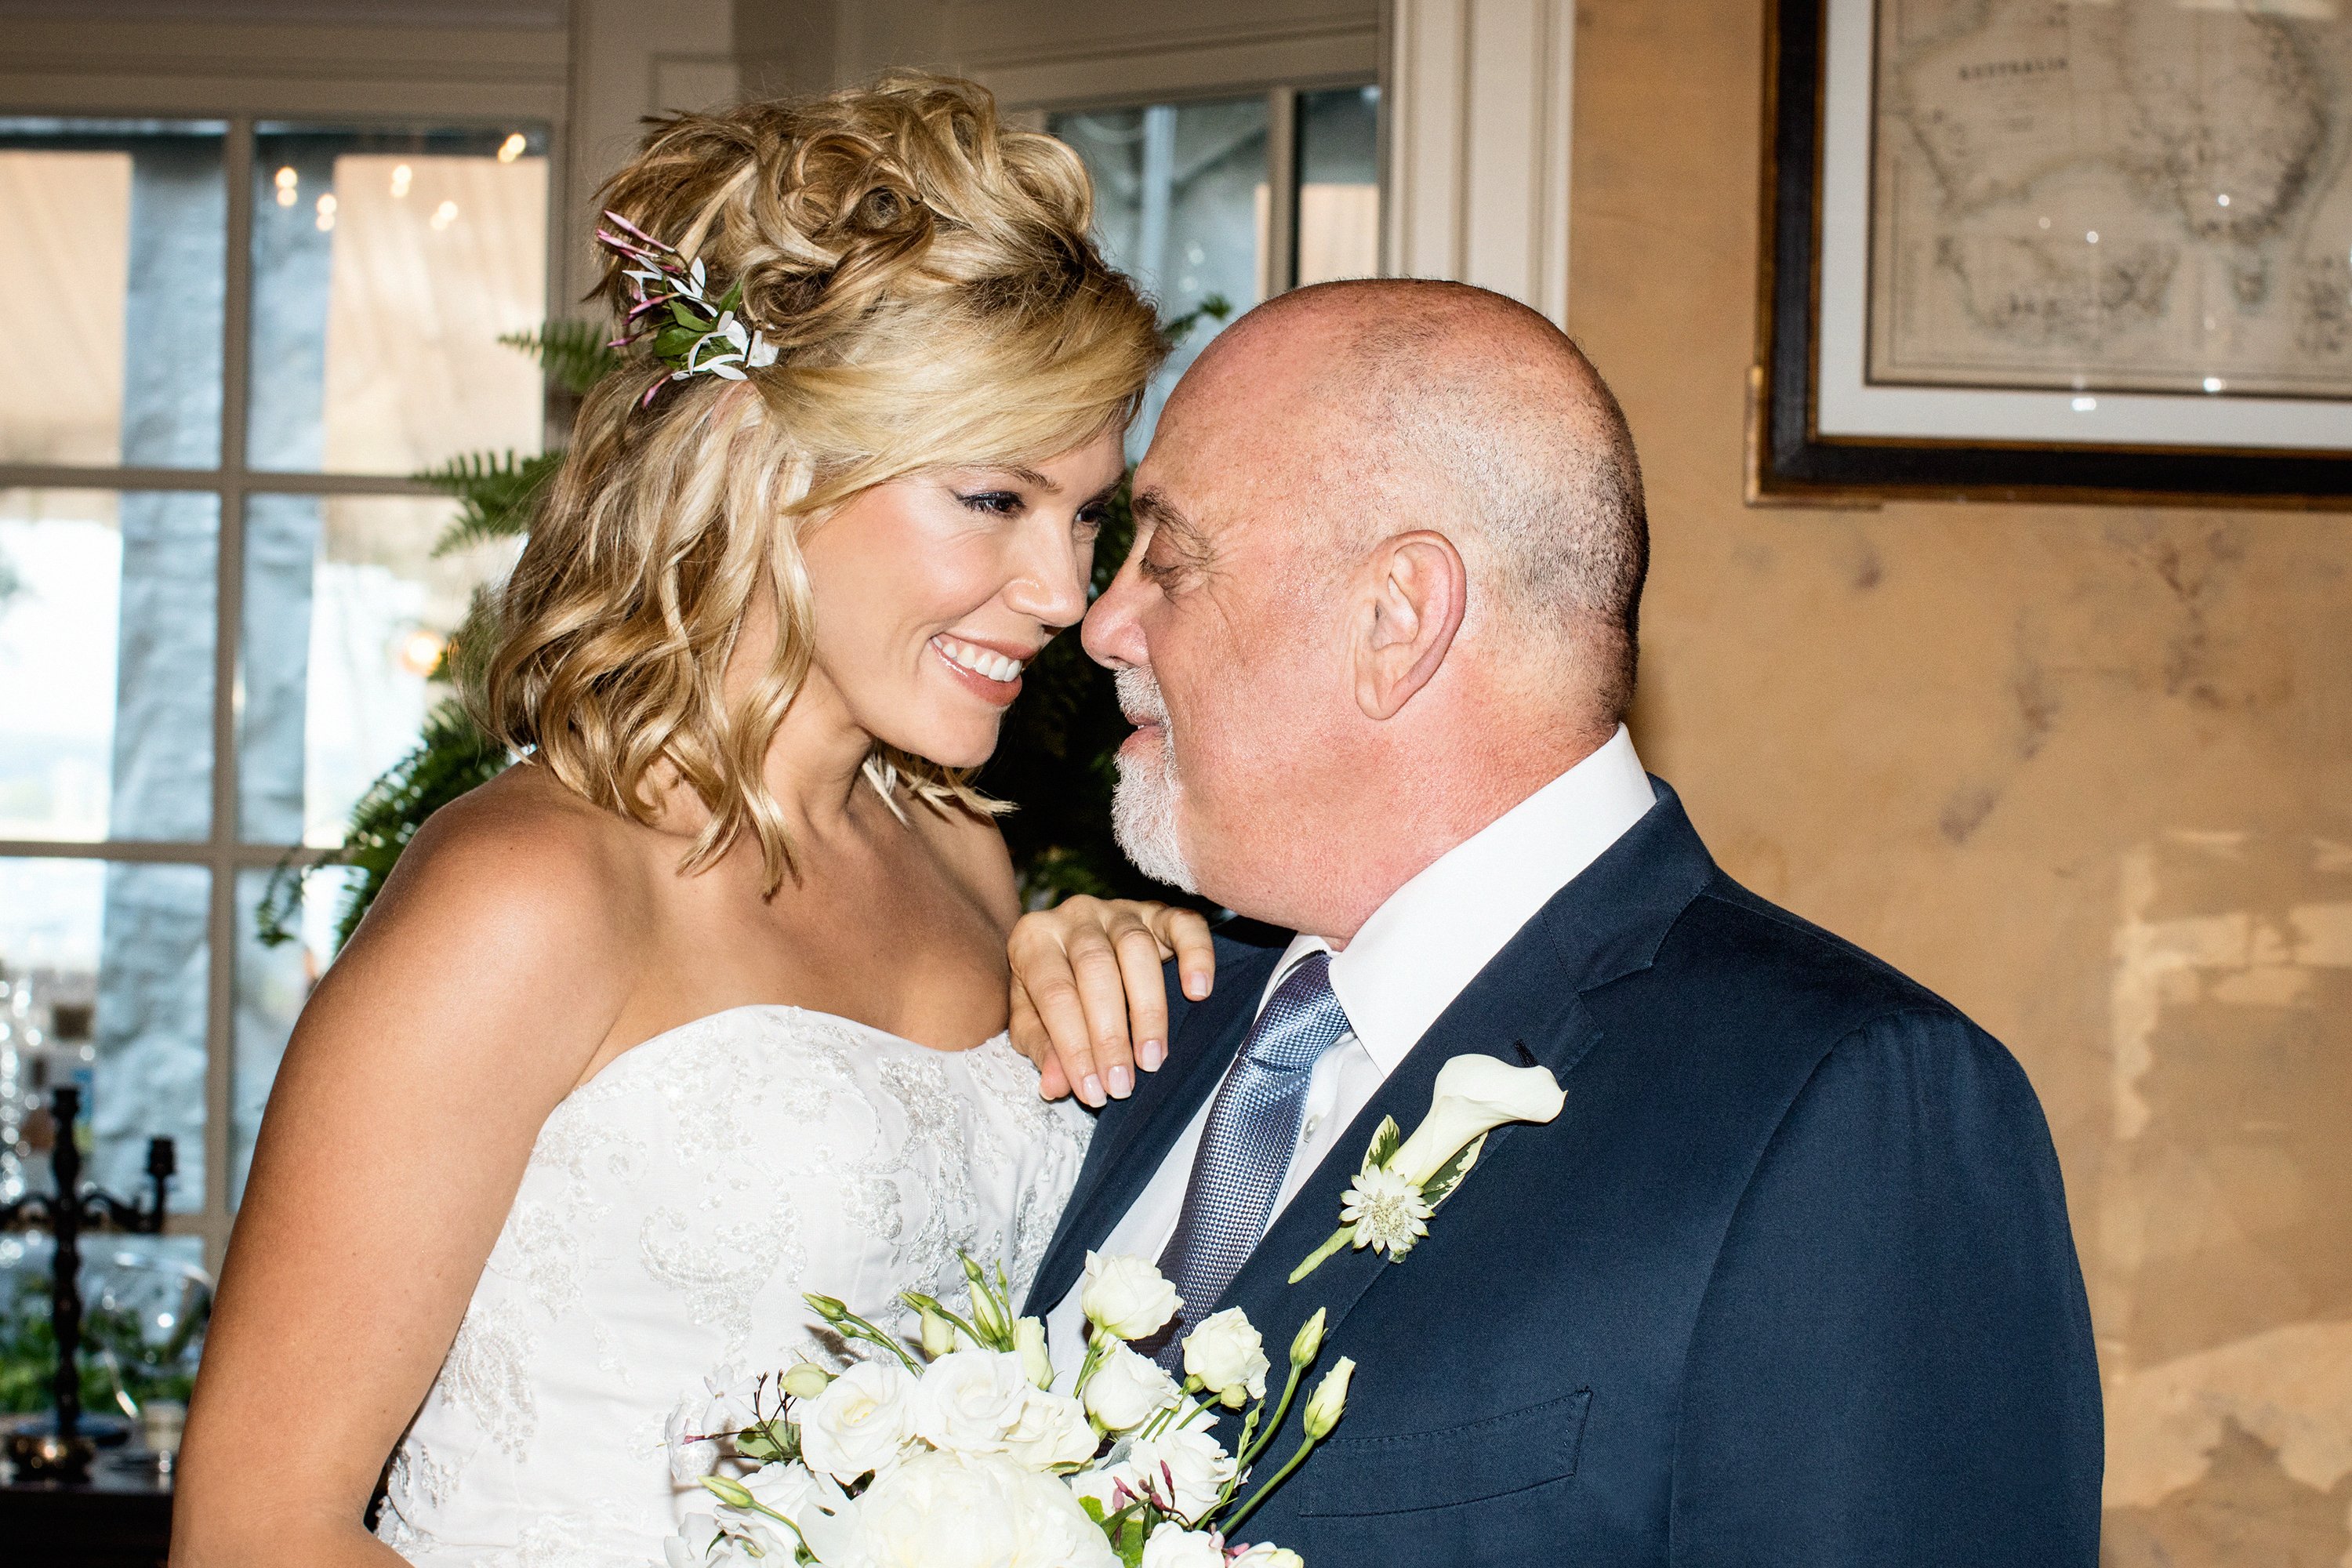 Newlyweds Billy Joel and Alexis Roderick during their surprise wedding ceremony held at their estate on July 4, 2015 in Long Island. / Source: Getty Images